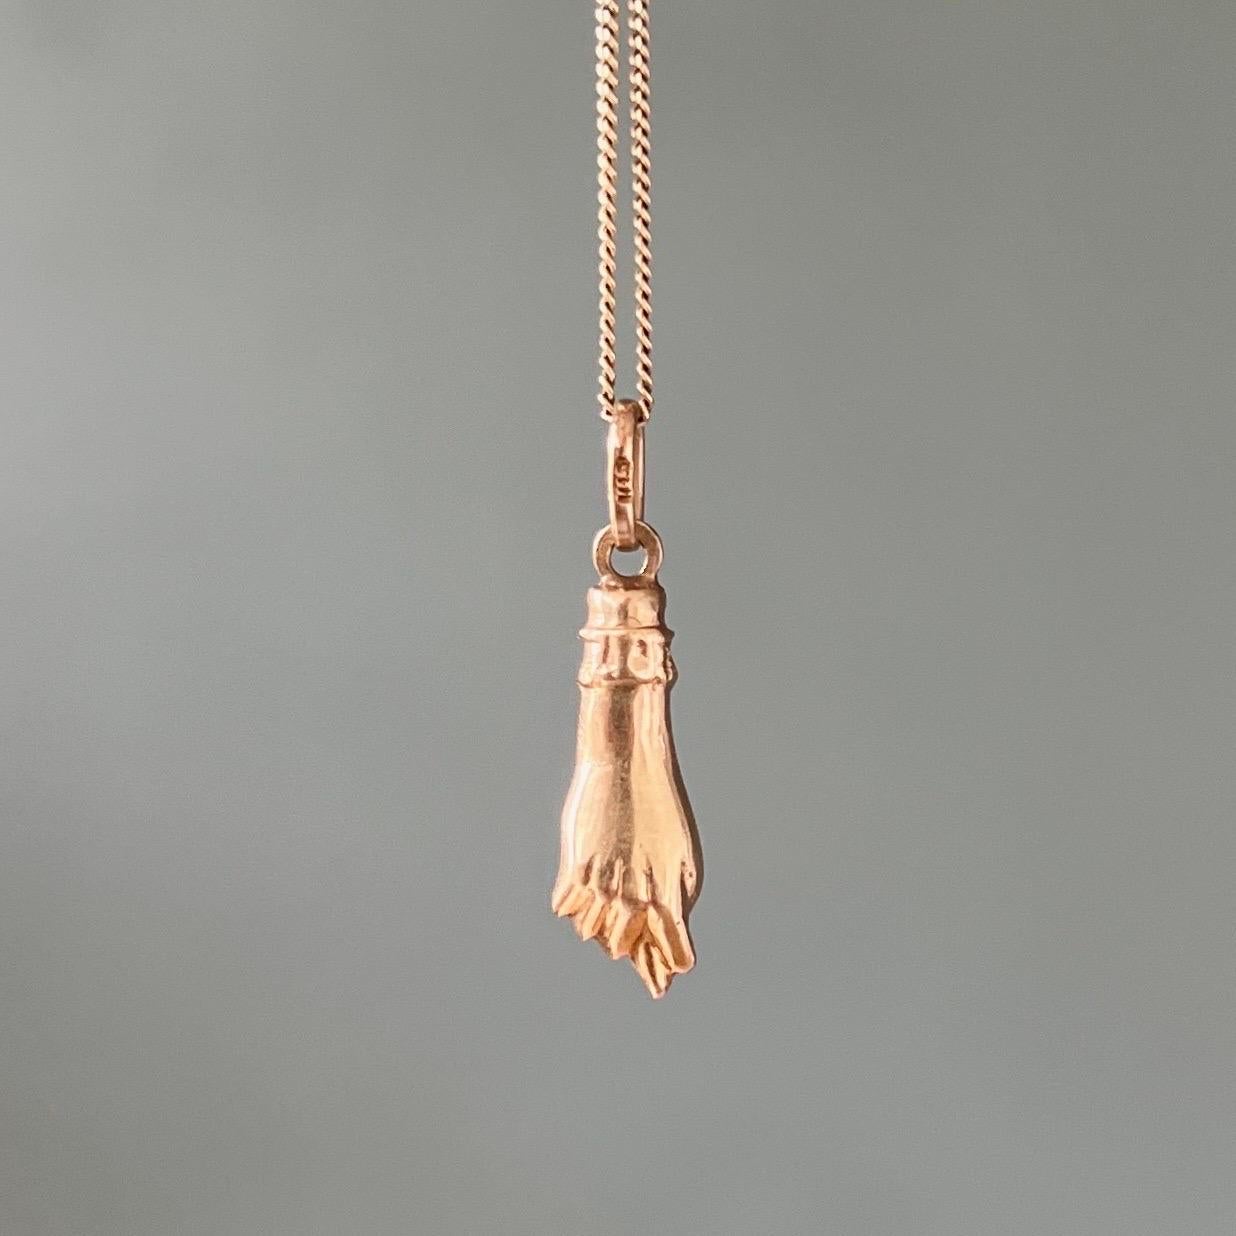 A mano figa hand charm pendant created in 14 karat gold. The cuff of the arm has beautiful details. This charm is great worn alone or layered with your other favorite beauties. The charm comes without the chain.

The figa hand symbol dates back